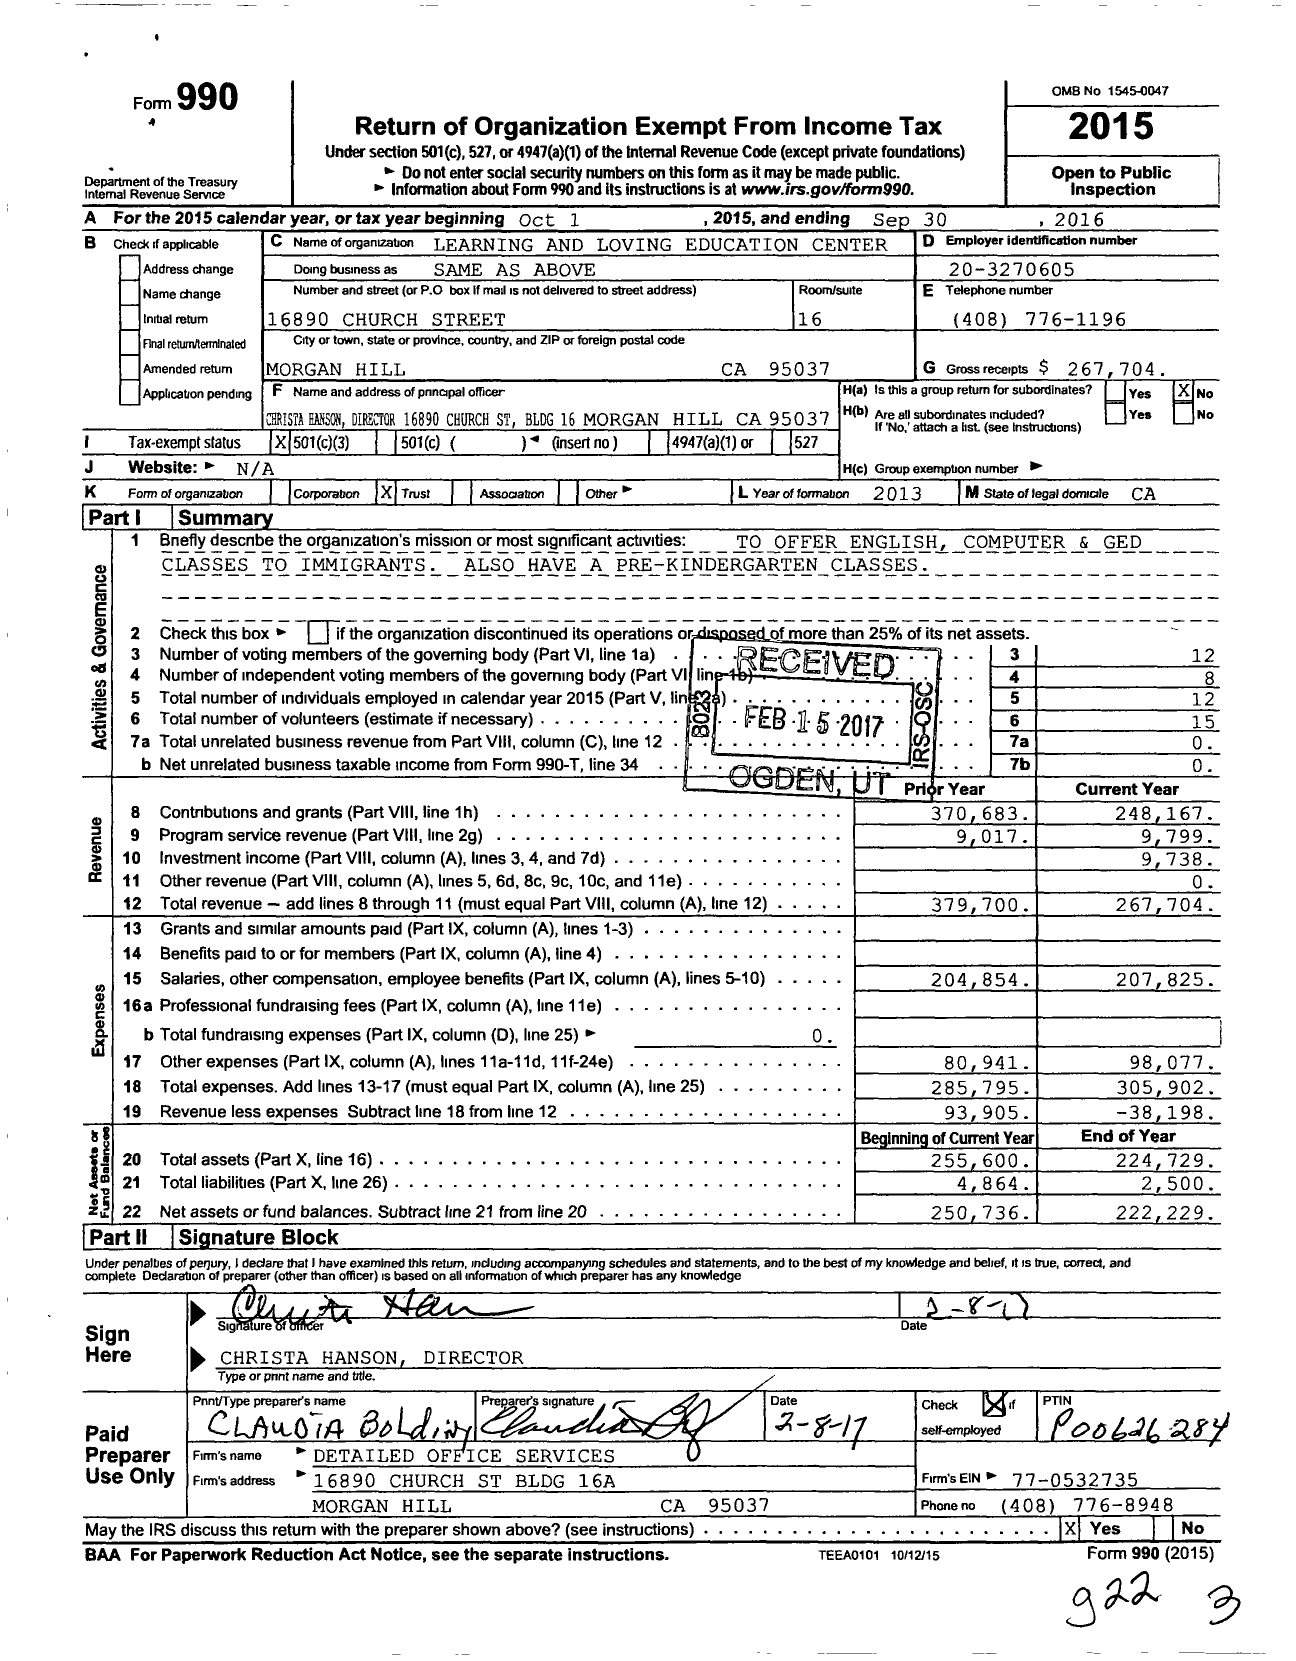 Image of first page of 2015 Form 990 for Learning and Loving Education Center